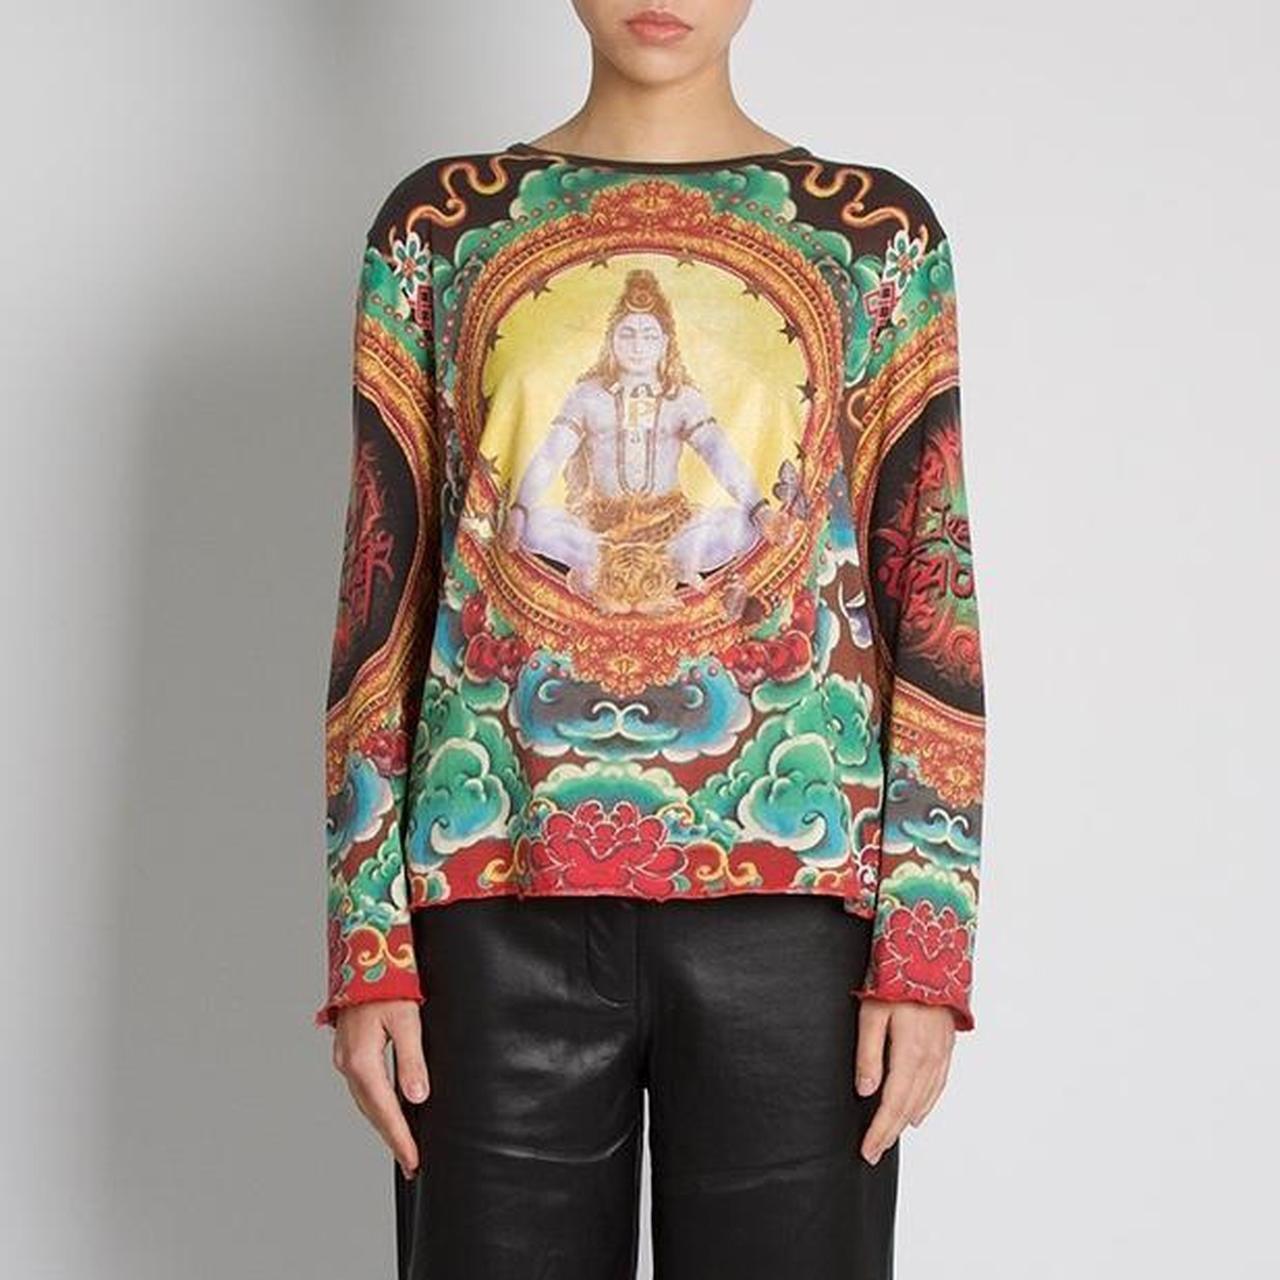 Jean-Paul Gaultier Homme Vintage Shiva Tattoo Printed TShirt Top For Sale 4